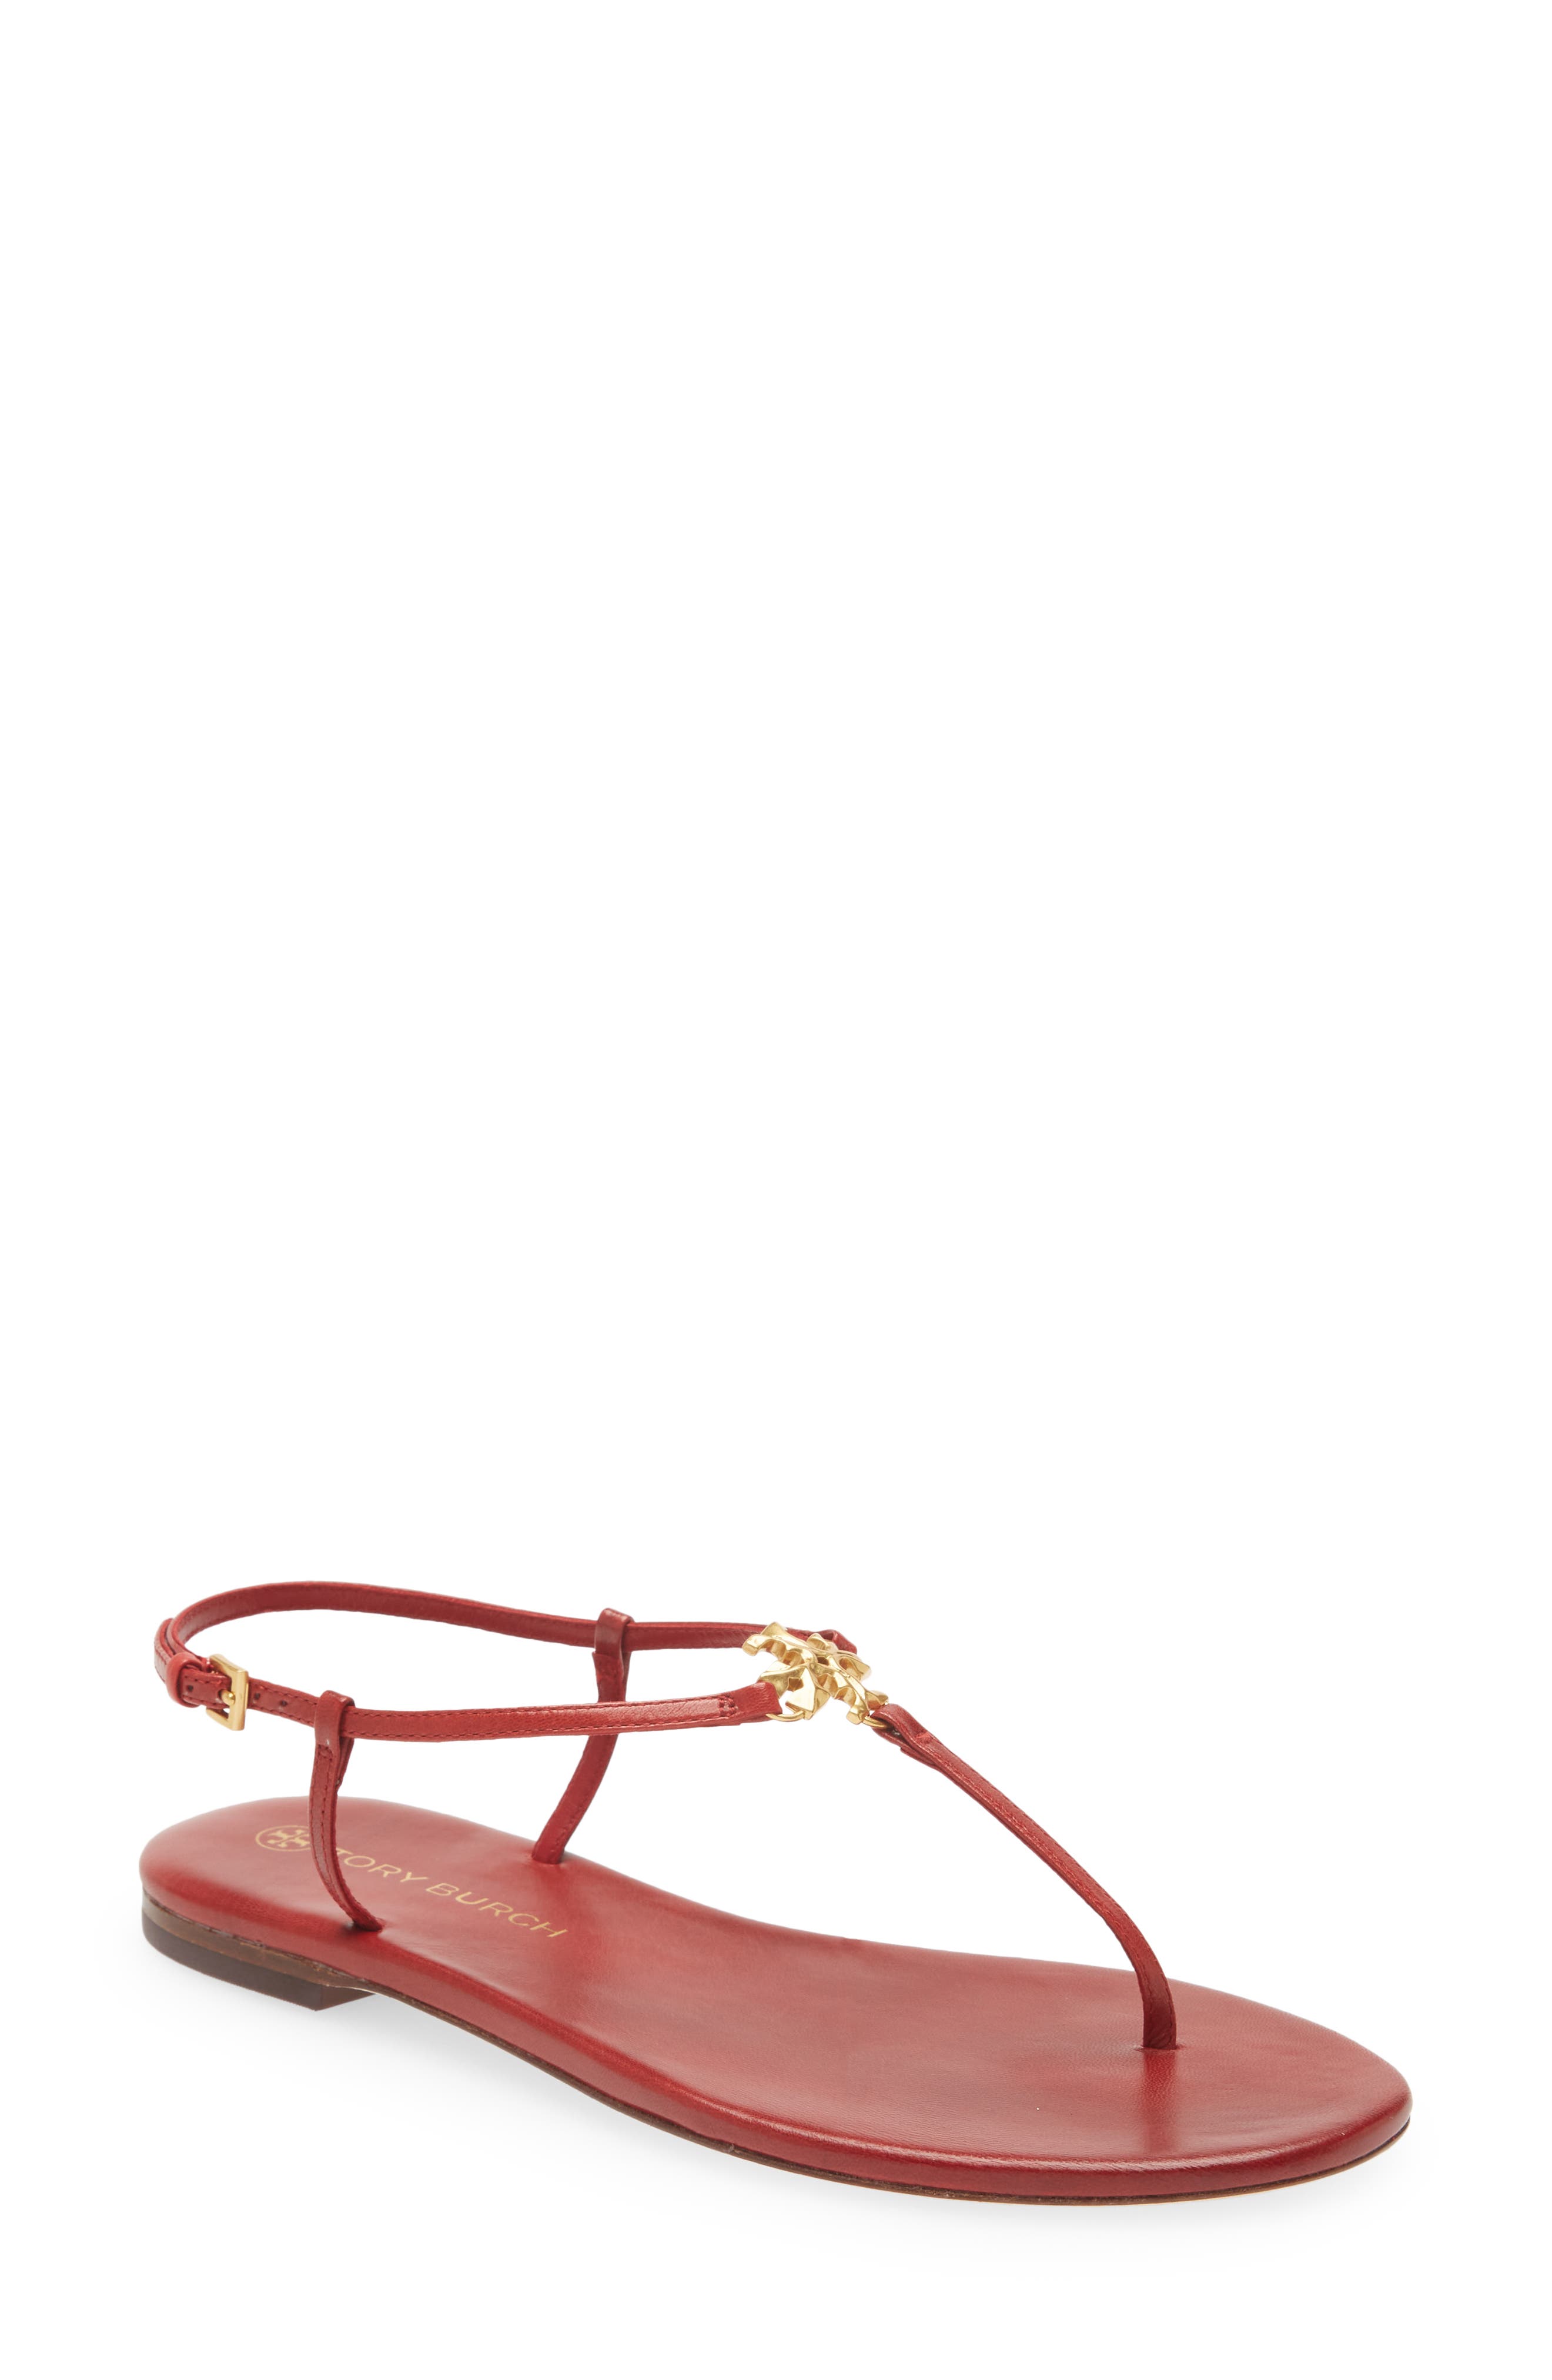 Tory Burch Capri Ankle Strap Sandal in Tory Red